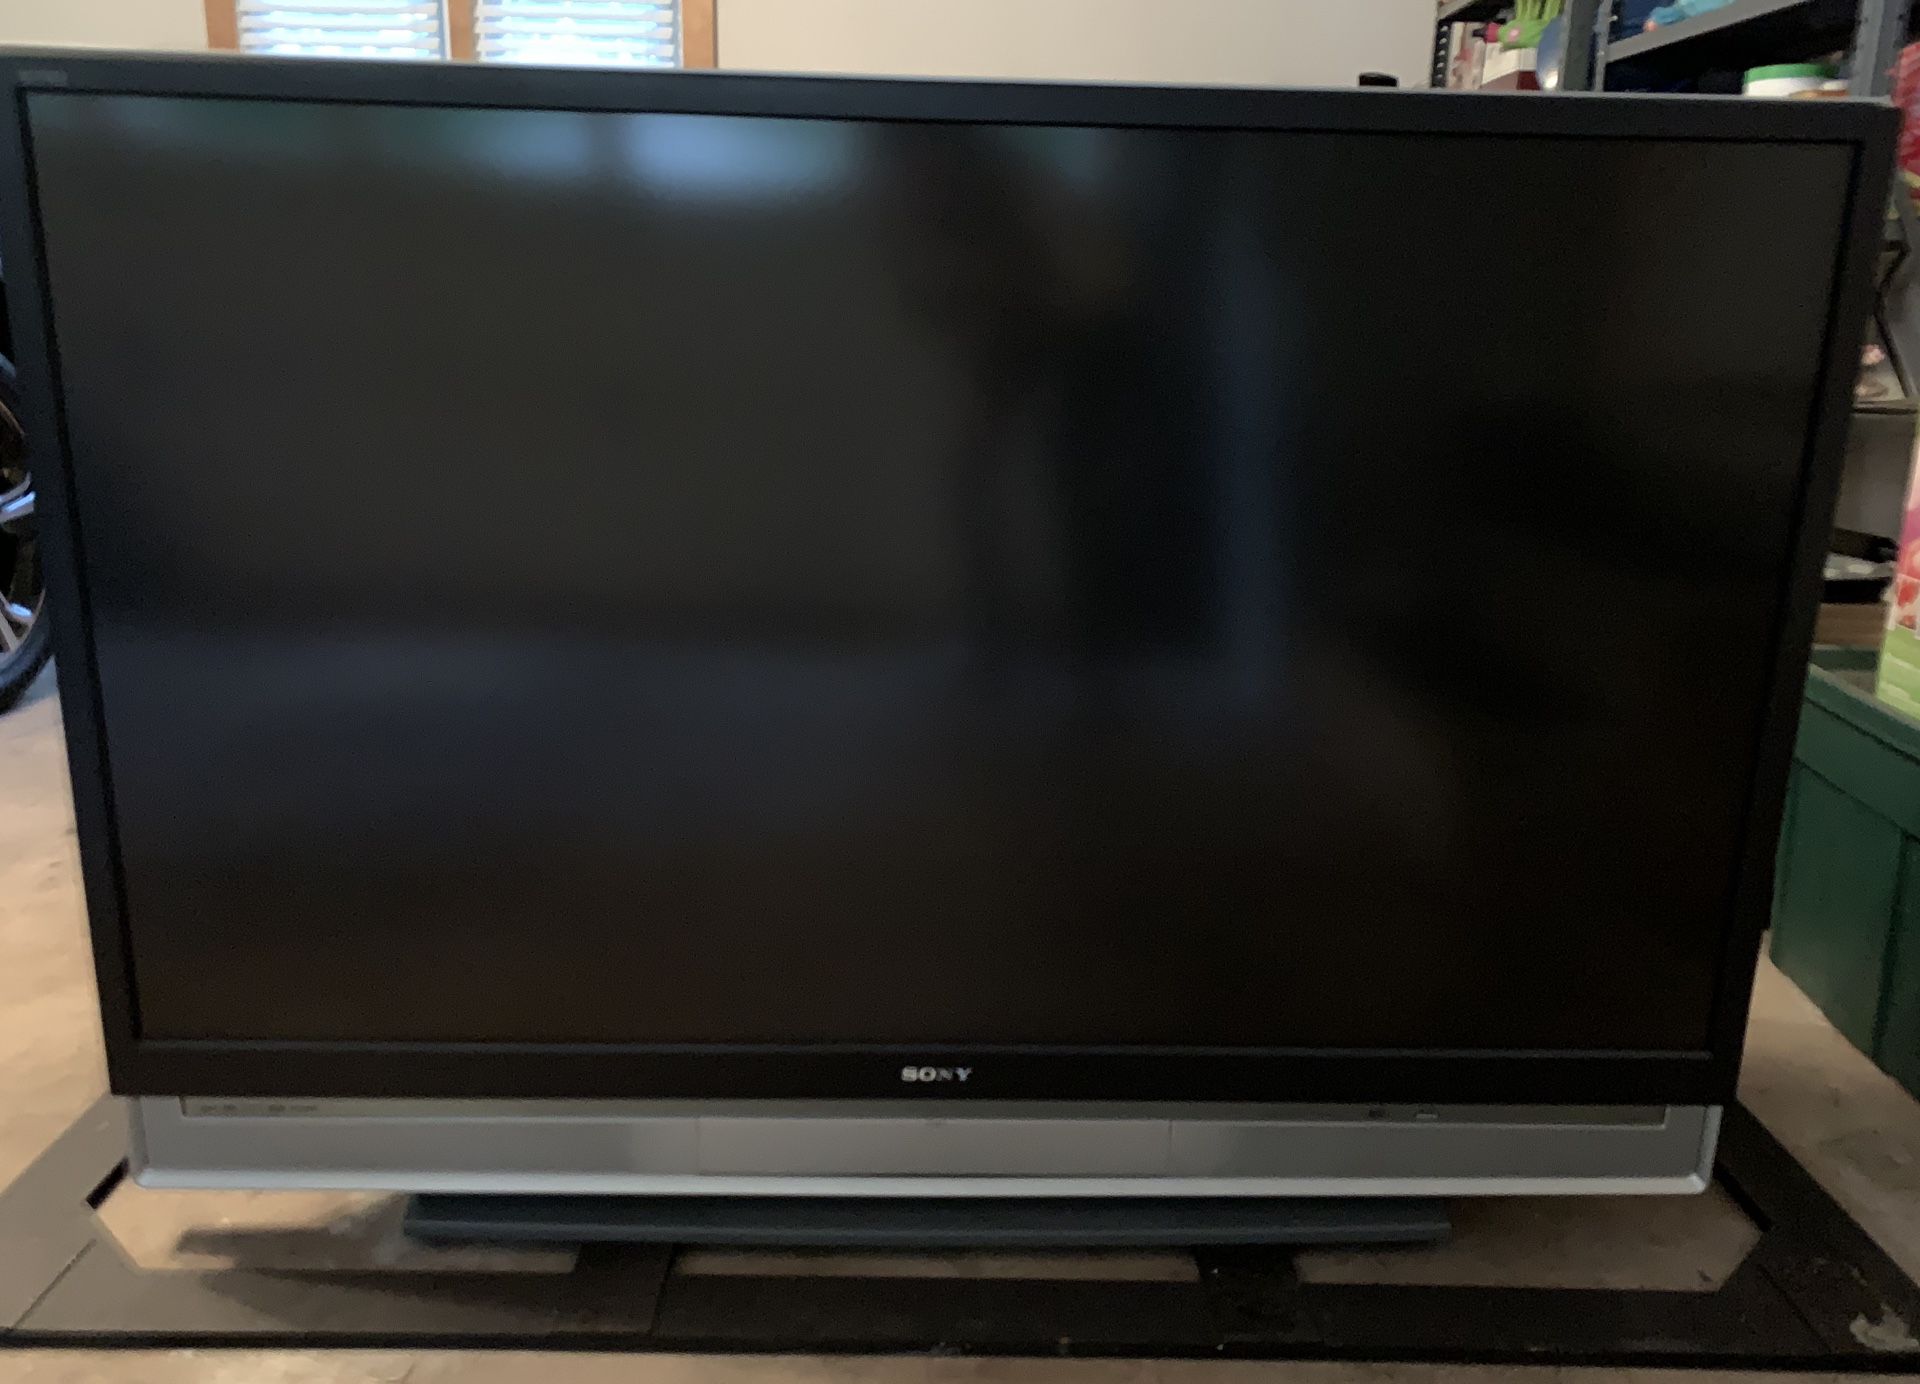 Sony 60" SXRD Television